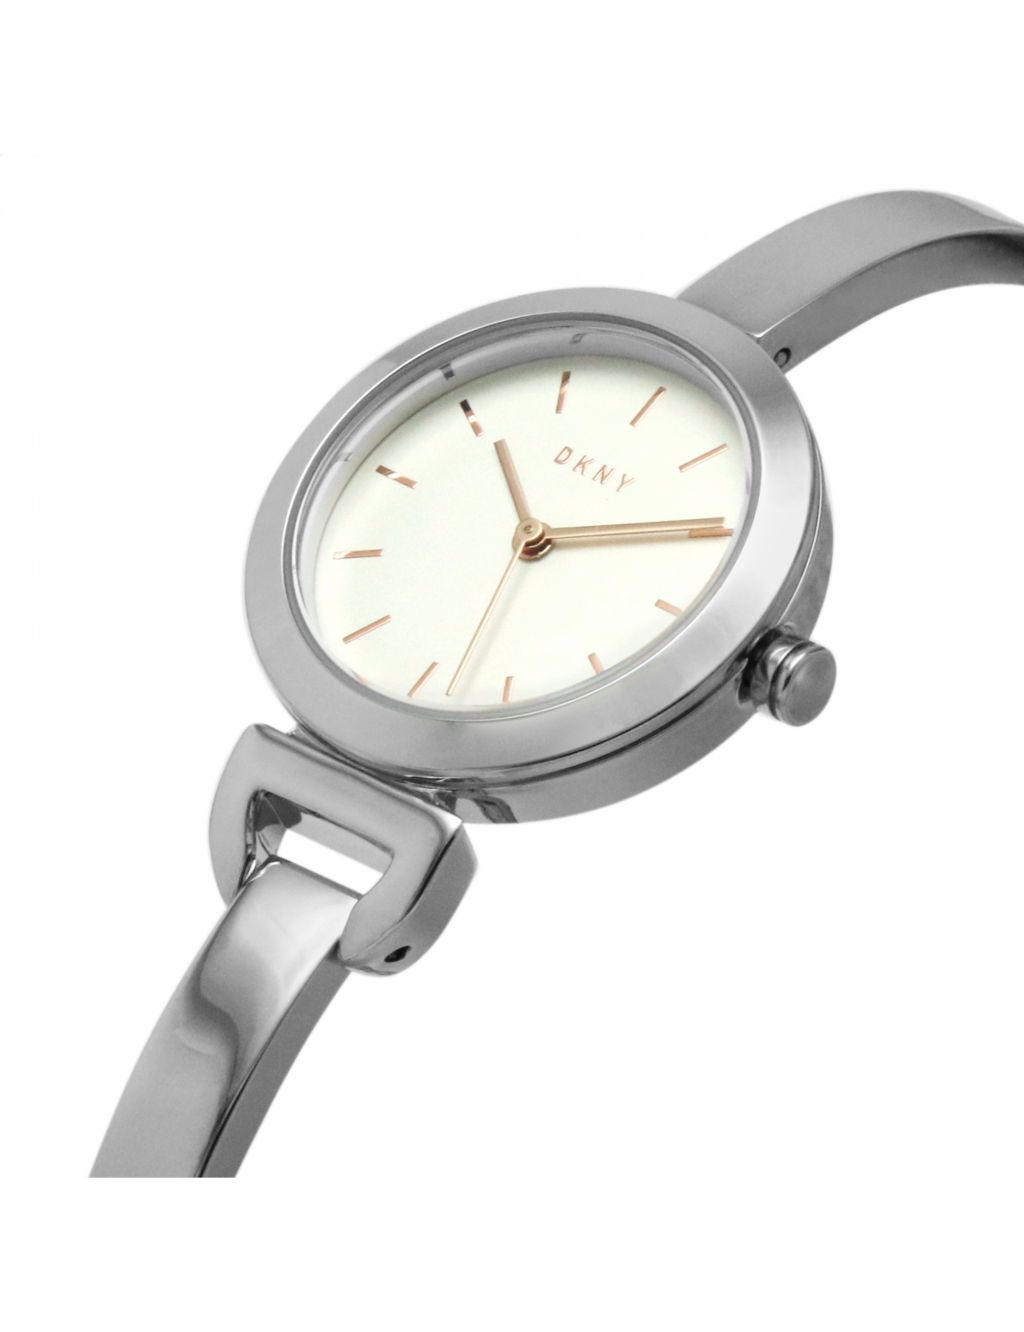 DKNY Uptown Stainless Steel Watch image 3